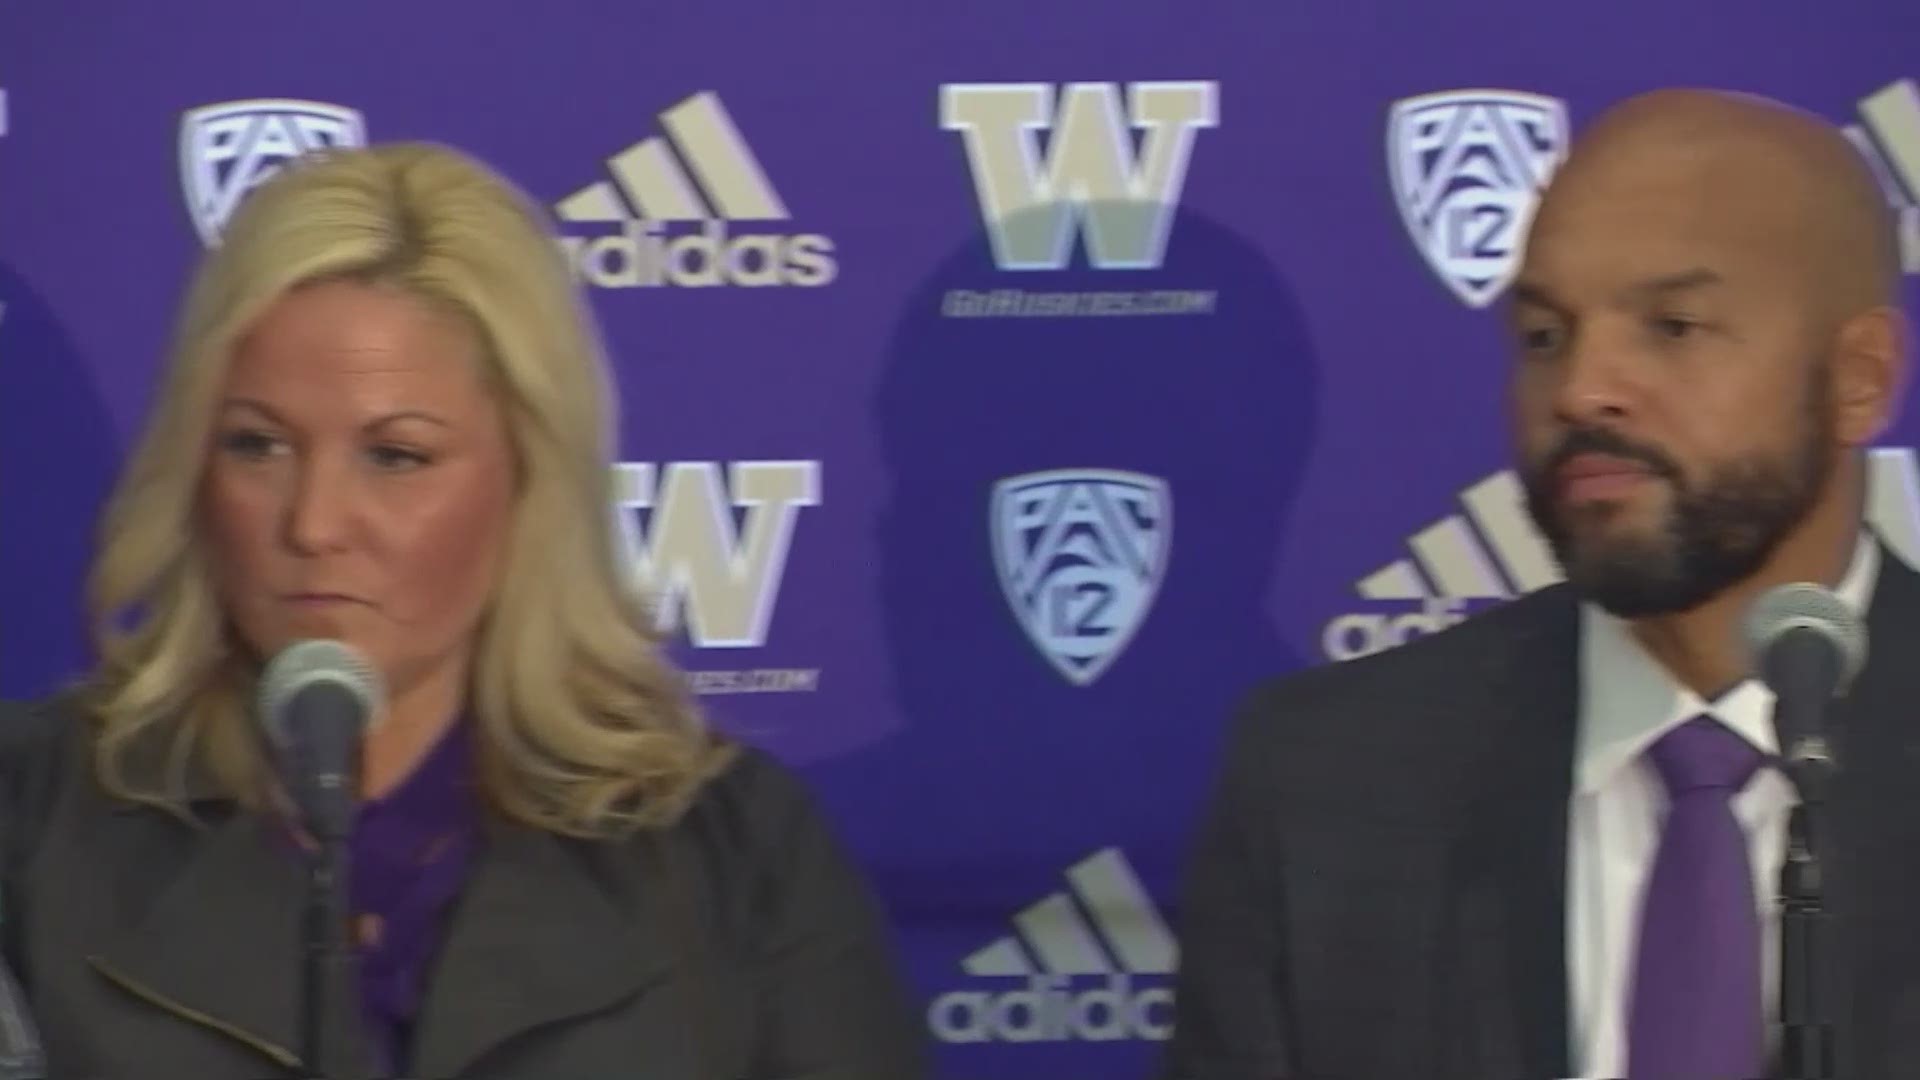 Petersen will coach the Huskies in their bowl game and then turn the reins over to his successor, Jimmy Lake, the UW defensive coordinator.